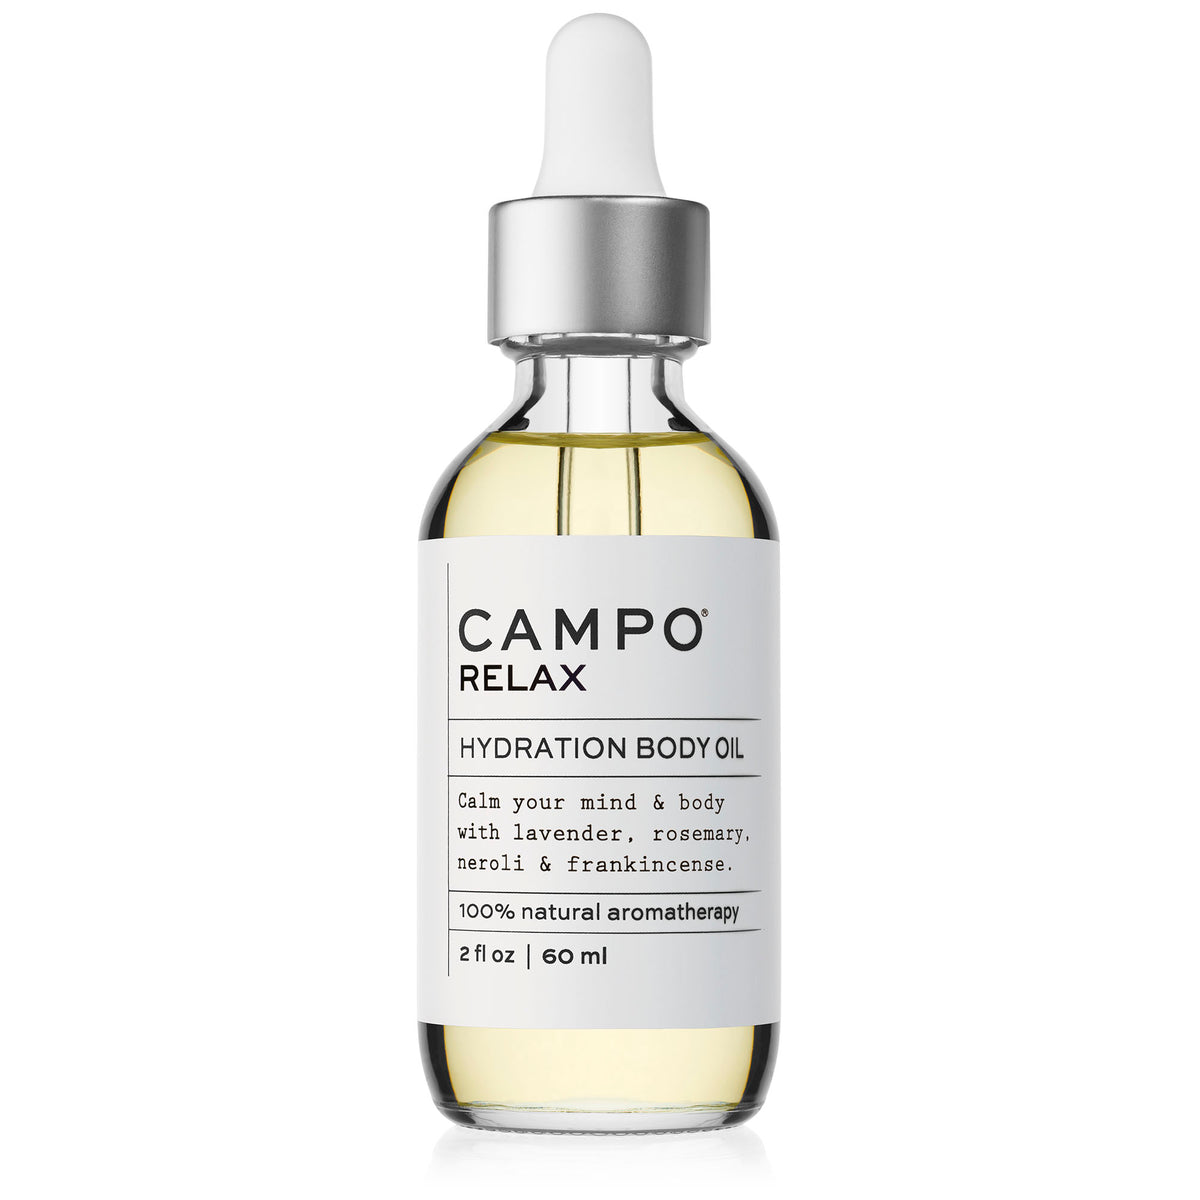 Campo Beauty Hydration Body Oil - RELAX Blend that in 60 ml. Dispels feelings of stress to promote deep relaxation.  Gives your skin an instant glow and an infusion of nourishing and deep hydration.  A calming blend of herbaceous floral notes of French Lavender, Rosemary, Frankincense, Italian Neroli Orange Blossom, Sweet Orange, and Bitter Orange. Blended with 100% natural beauty carrier oils.